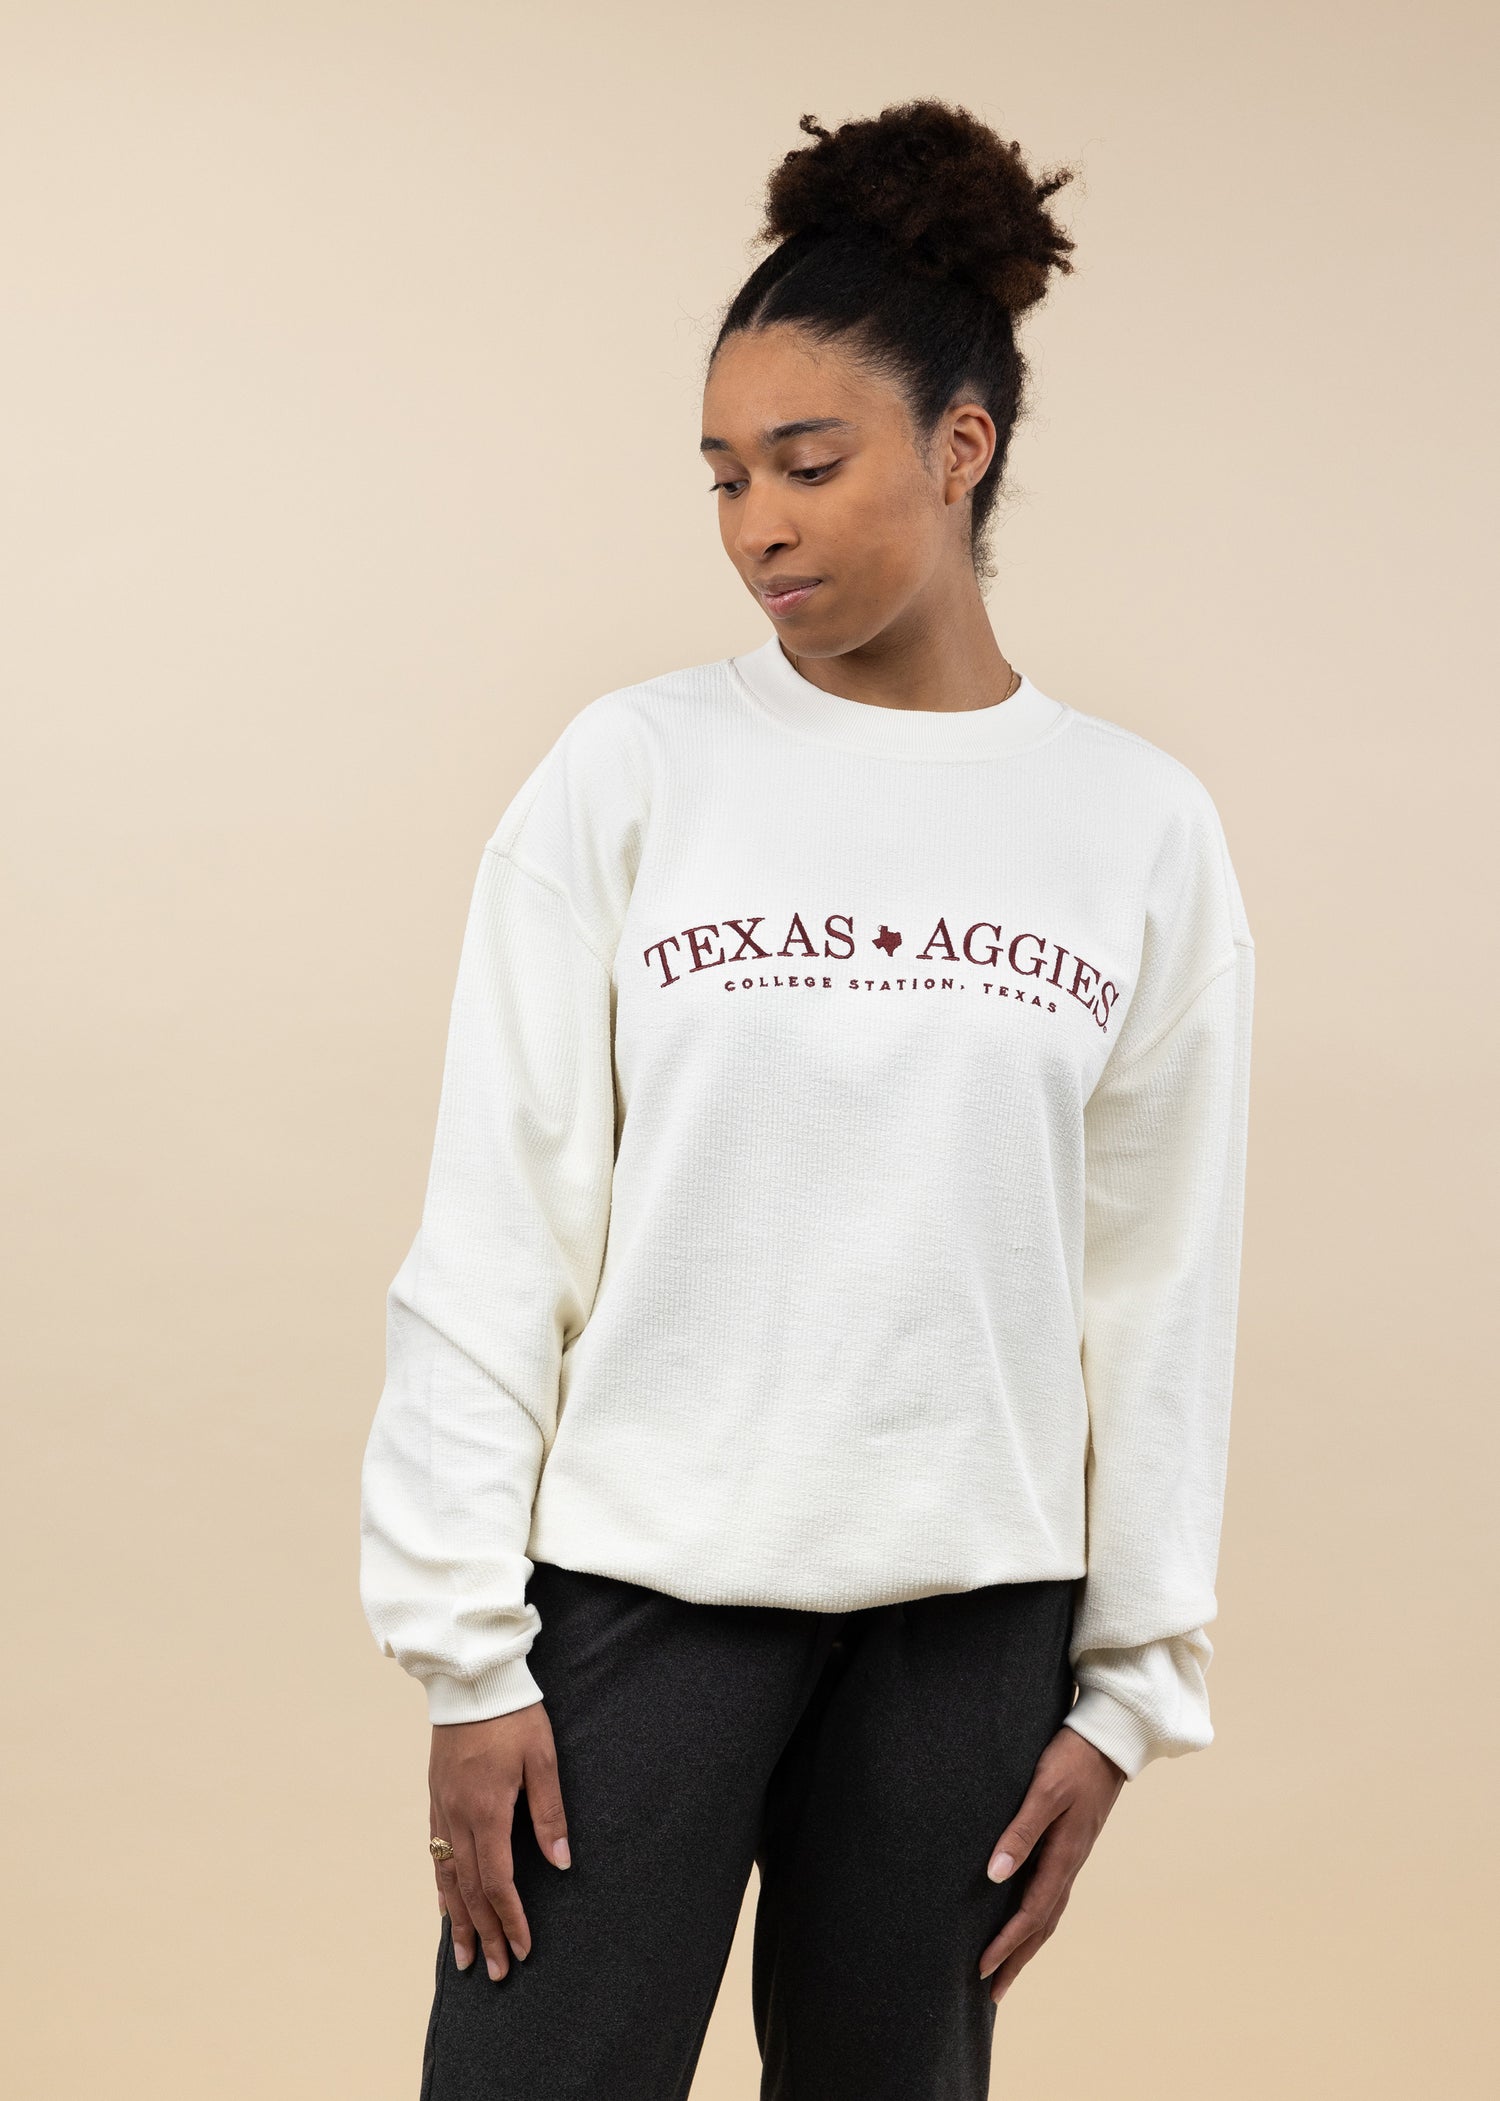 Texas Aggies Simple Embroidered Corduroy Oversized Pullover